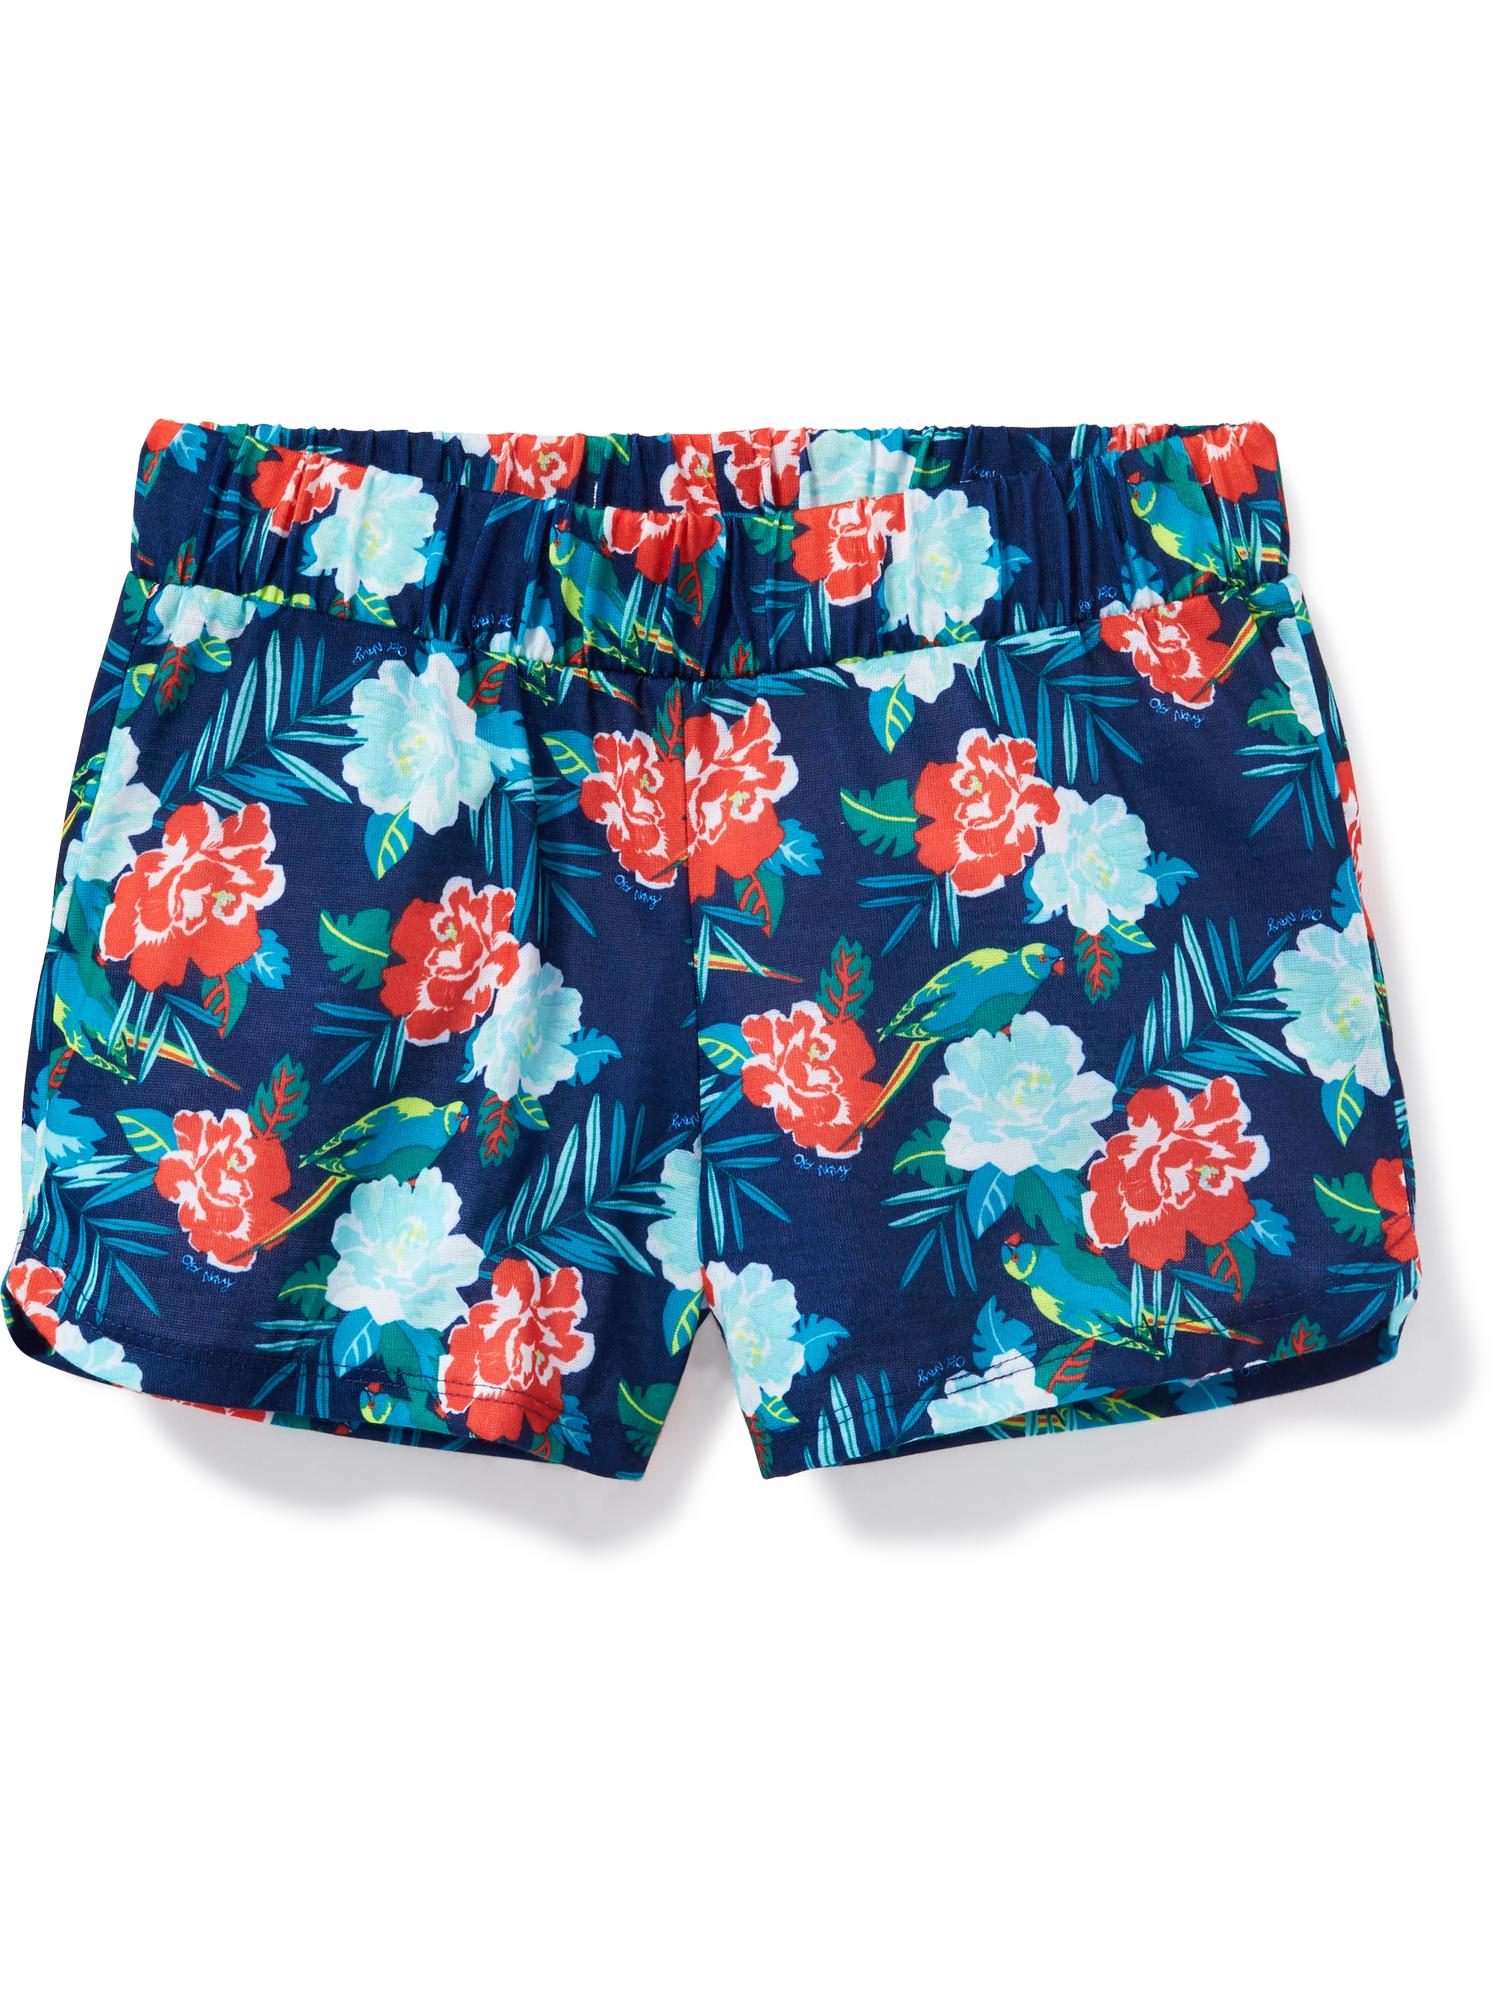 Printed Sleep Shorts for Girls | Old Navy